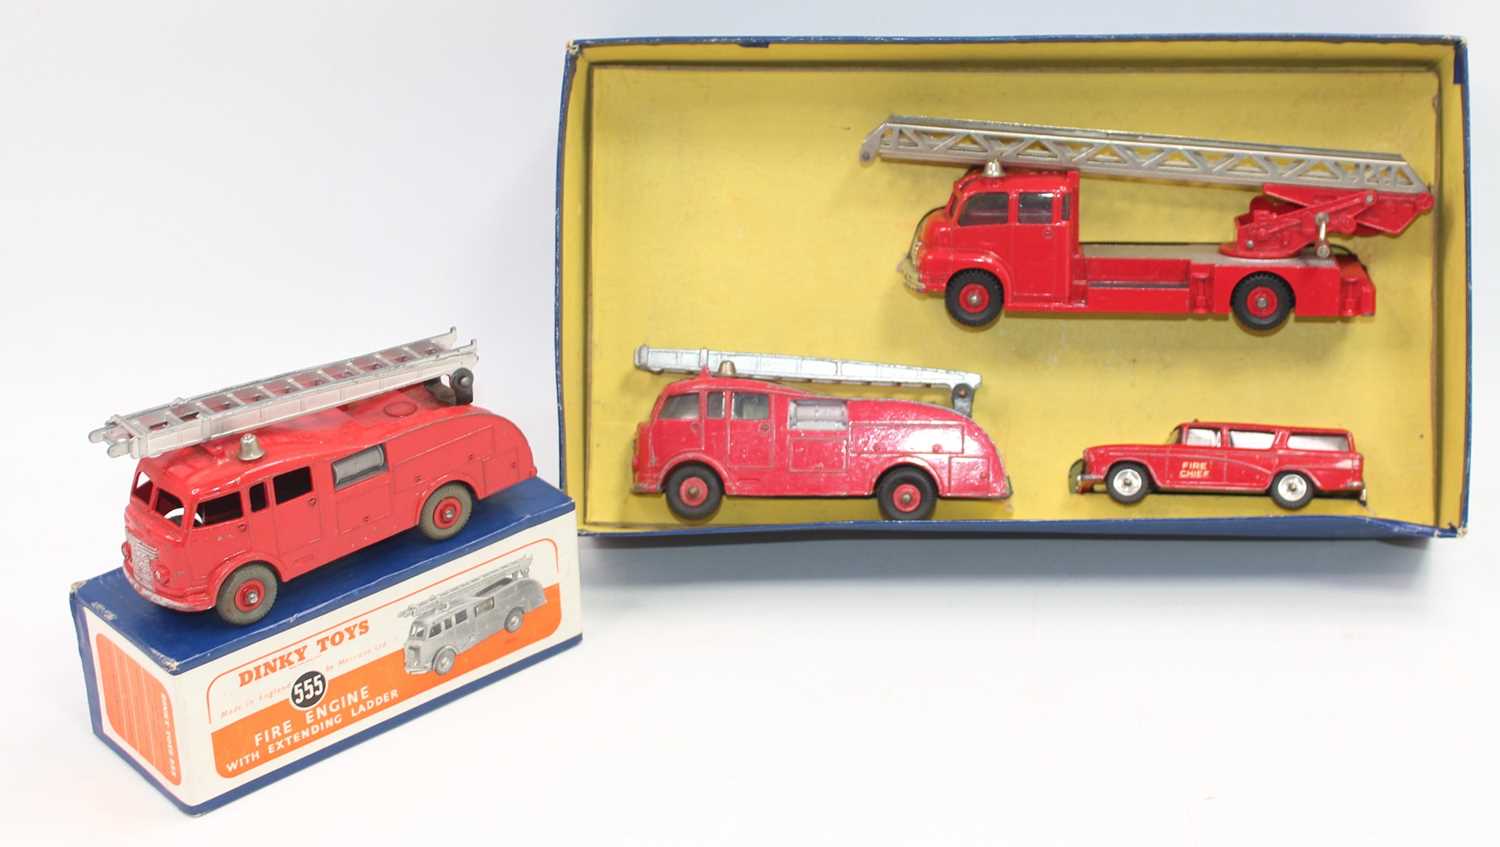 Dinky Supertoys 957 Fire service gift set, in box with base insert but missing lid models in good